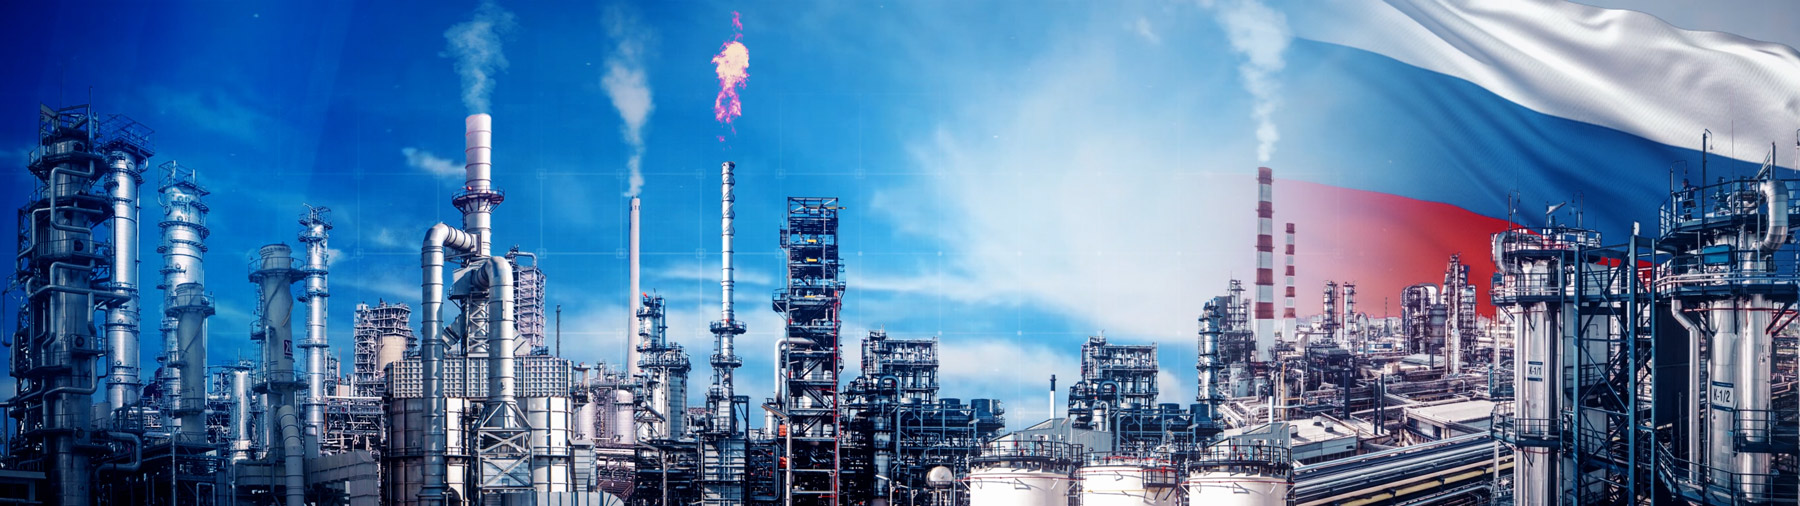 oil factories video poster